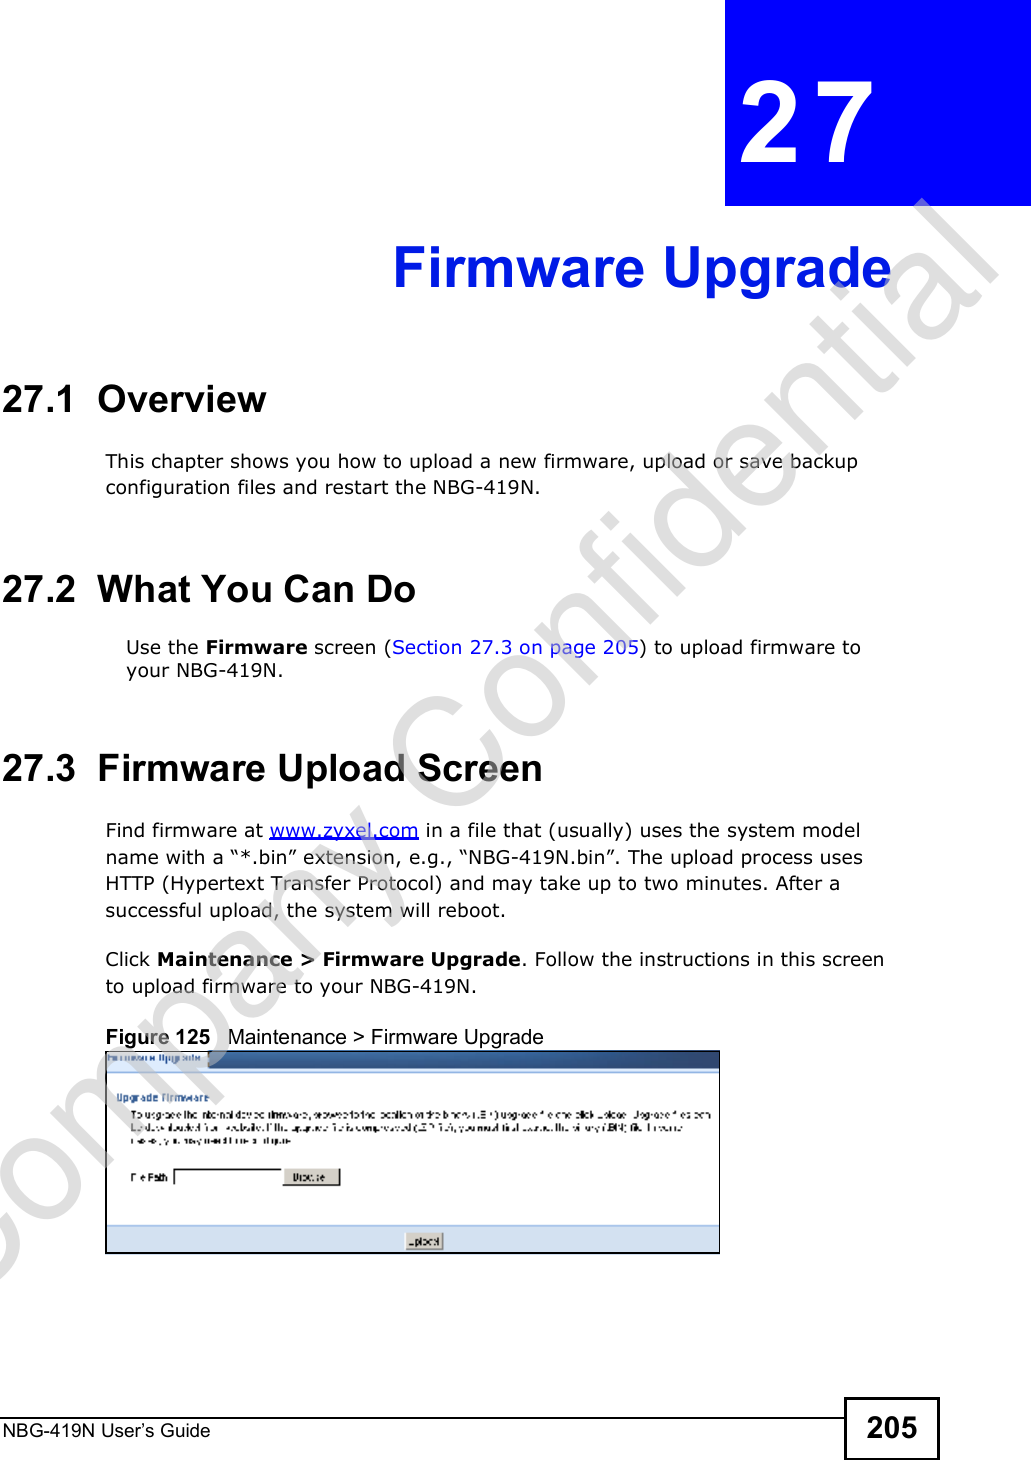 NBG-419N User s Guide 205CHAPTER  27 Firmware Upgrade27.1  OverviewThis chapter shows you how to upload a new firmware, upload or save backup configuration files and restart the NBG-419N.27.2  What You Can DoUse the Firmware screen (Section 27.3 on page 205) to upload firmware to your NBG-419N.27.3  Firmware Upload ScreenFind firmware at www.zyxel.com in a file that (usually) uses the system model name with a &quot;*.bin# extension, e.g., &quot;NBG-419N.bin#. The upload process uses HTTP (Hypertext Transfer Protocol) and may take up to two minutes. After a successful upload, the system will reboot.Click Maintenance &gt; Firmware Upgrade. Follow the instructions in this screen to upload firmware to your NBG-419N. Figure 125   Maintenance &gt; Firmware Upgrade Company Confidential